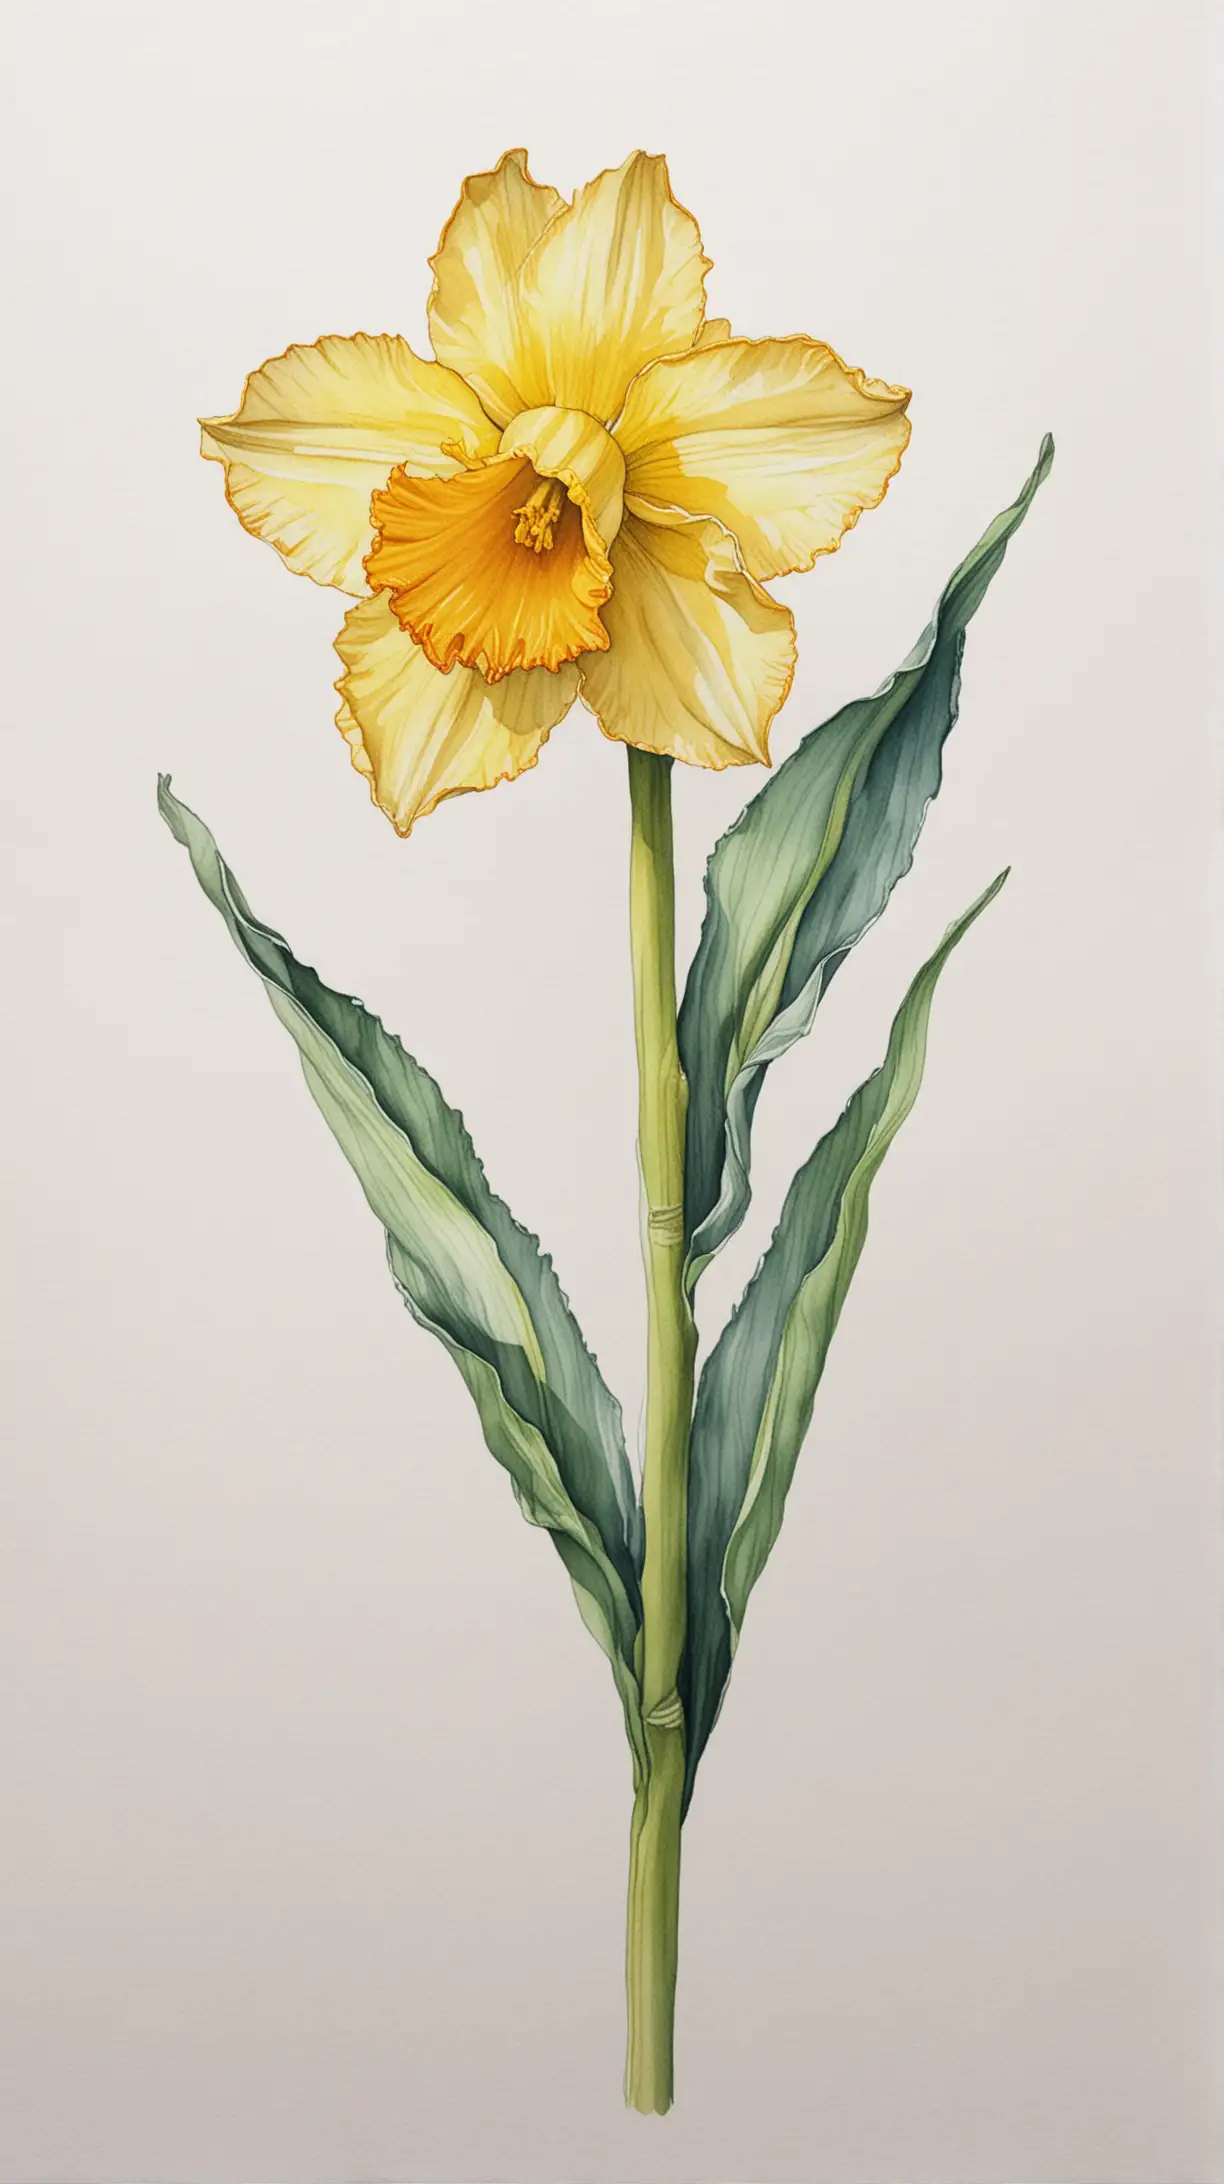 Daffodil Birth Flower Line Art in Watercolor Style